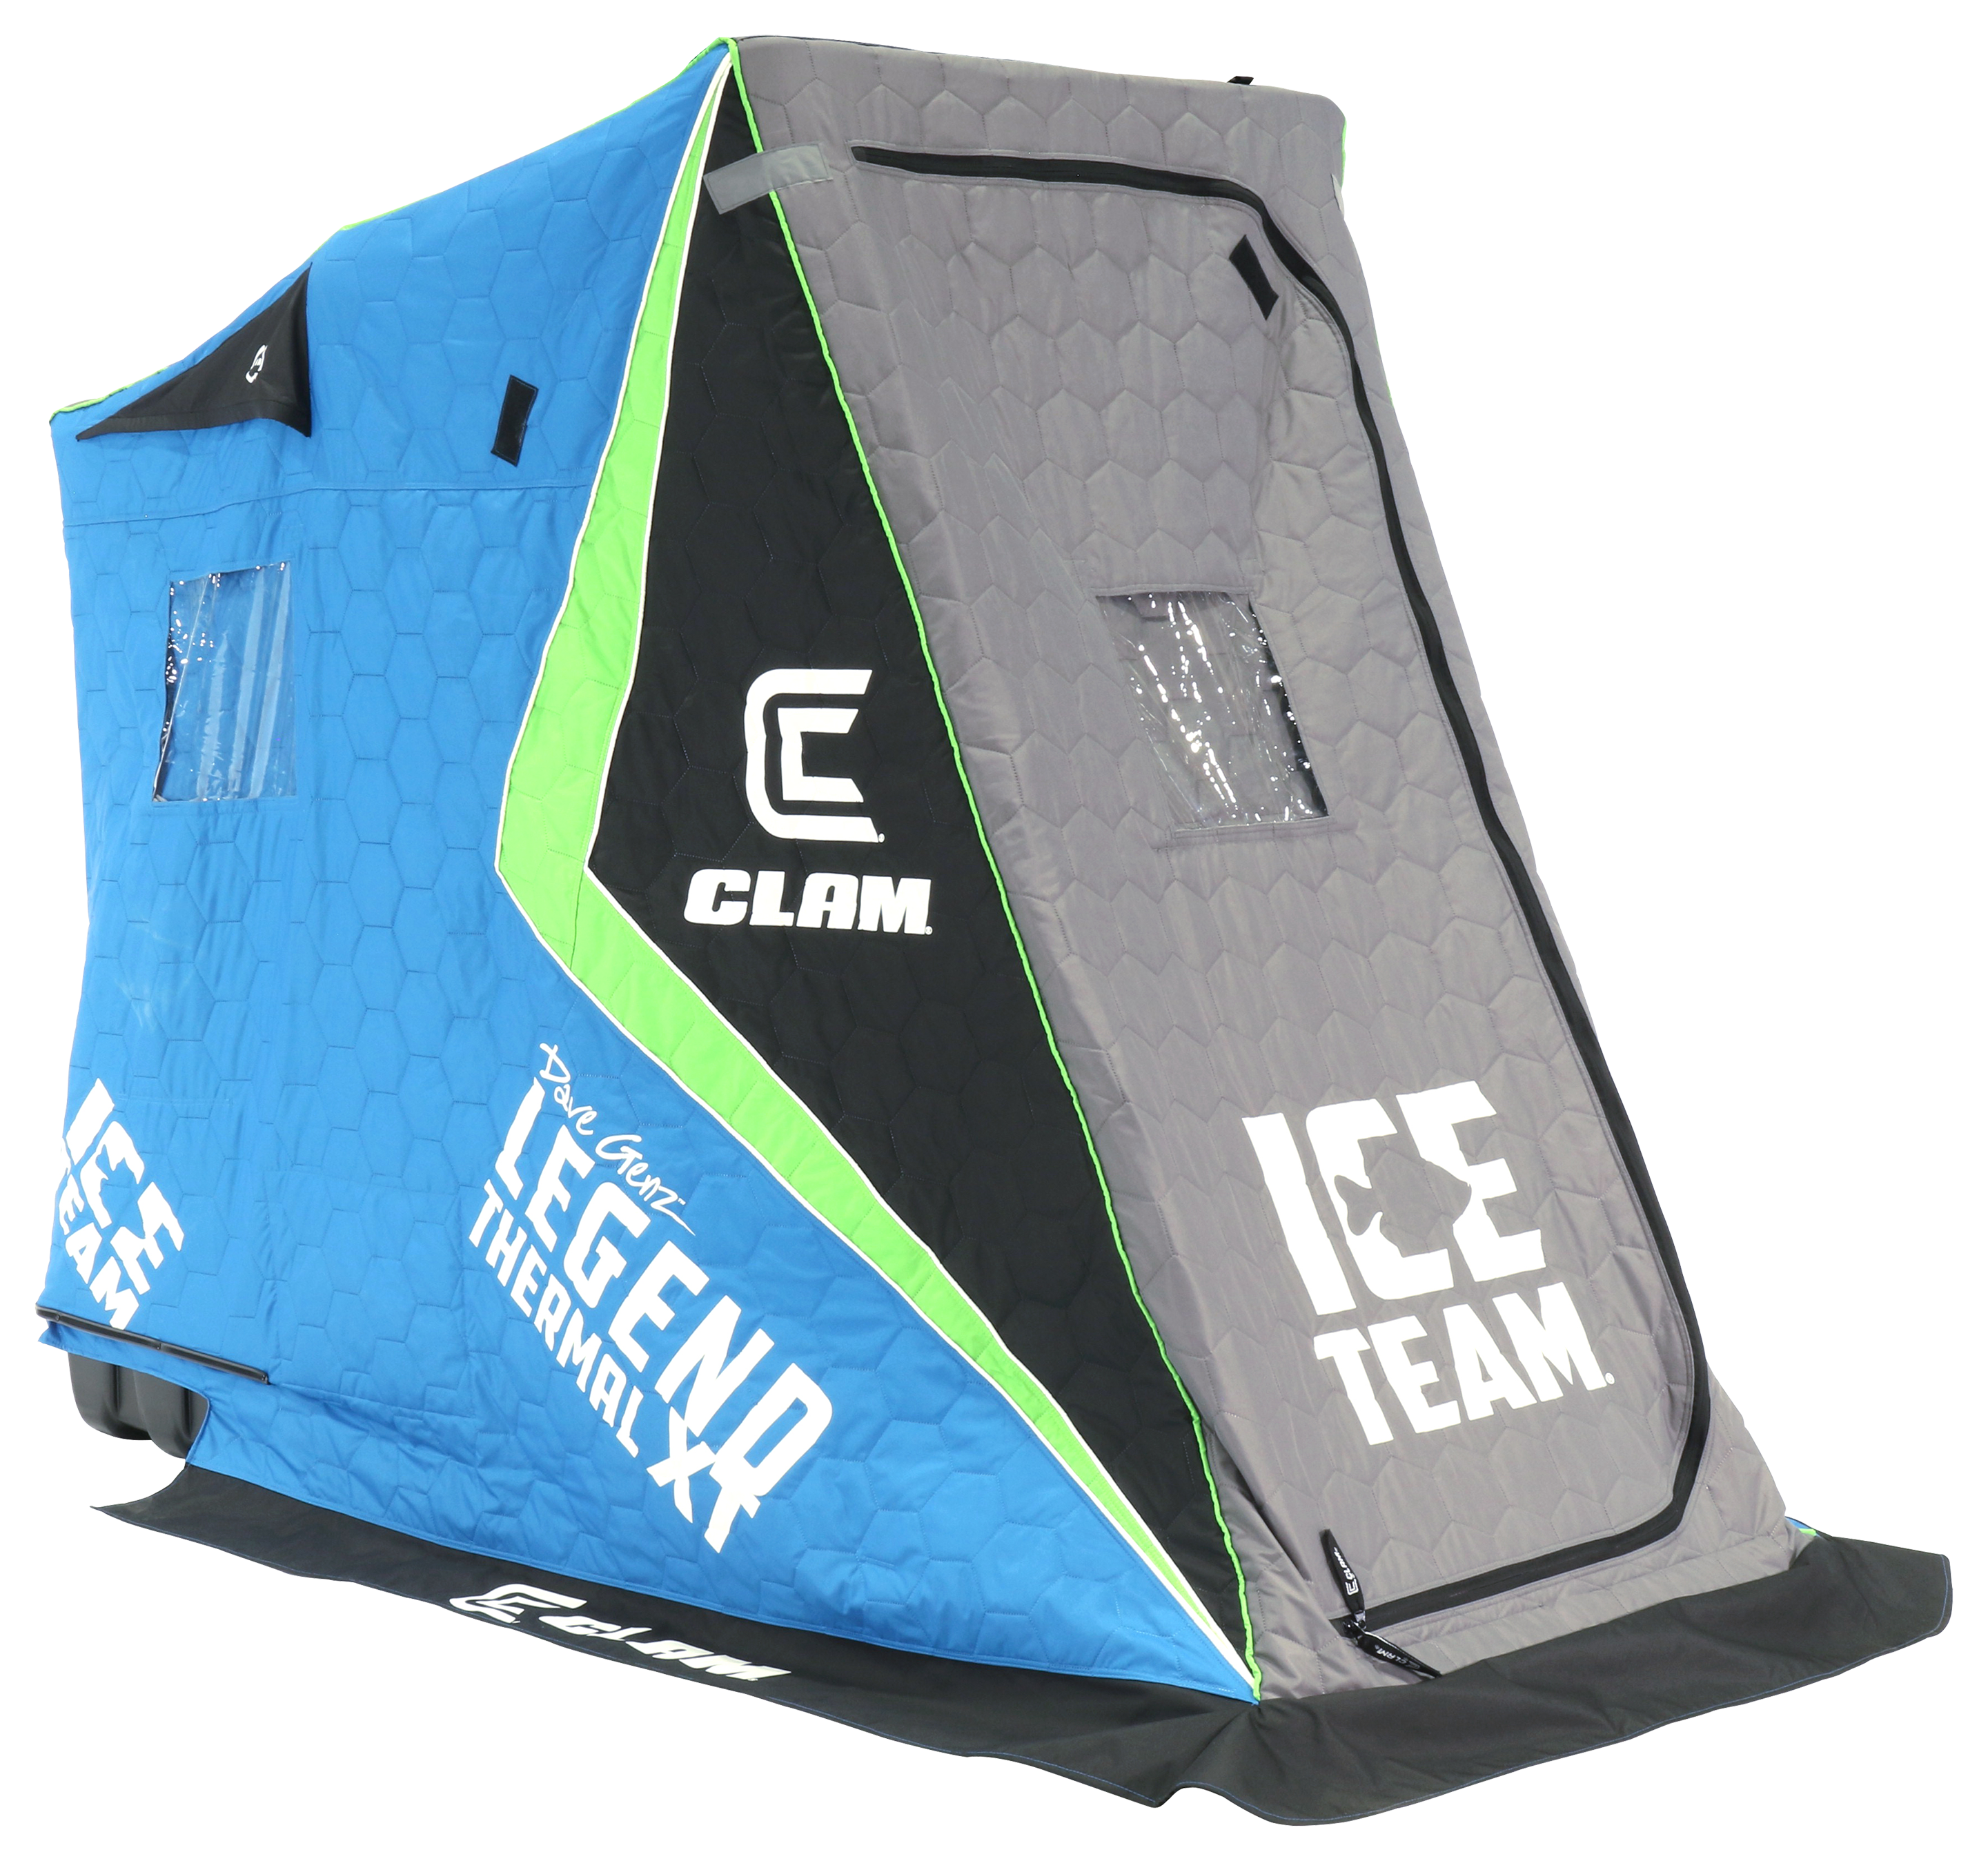 Clam Ice Team Legend XT Thermal Ice Shelter